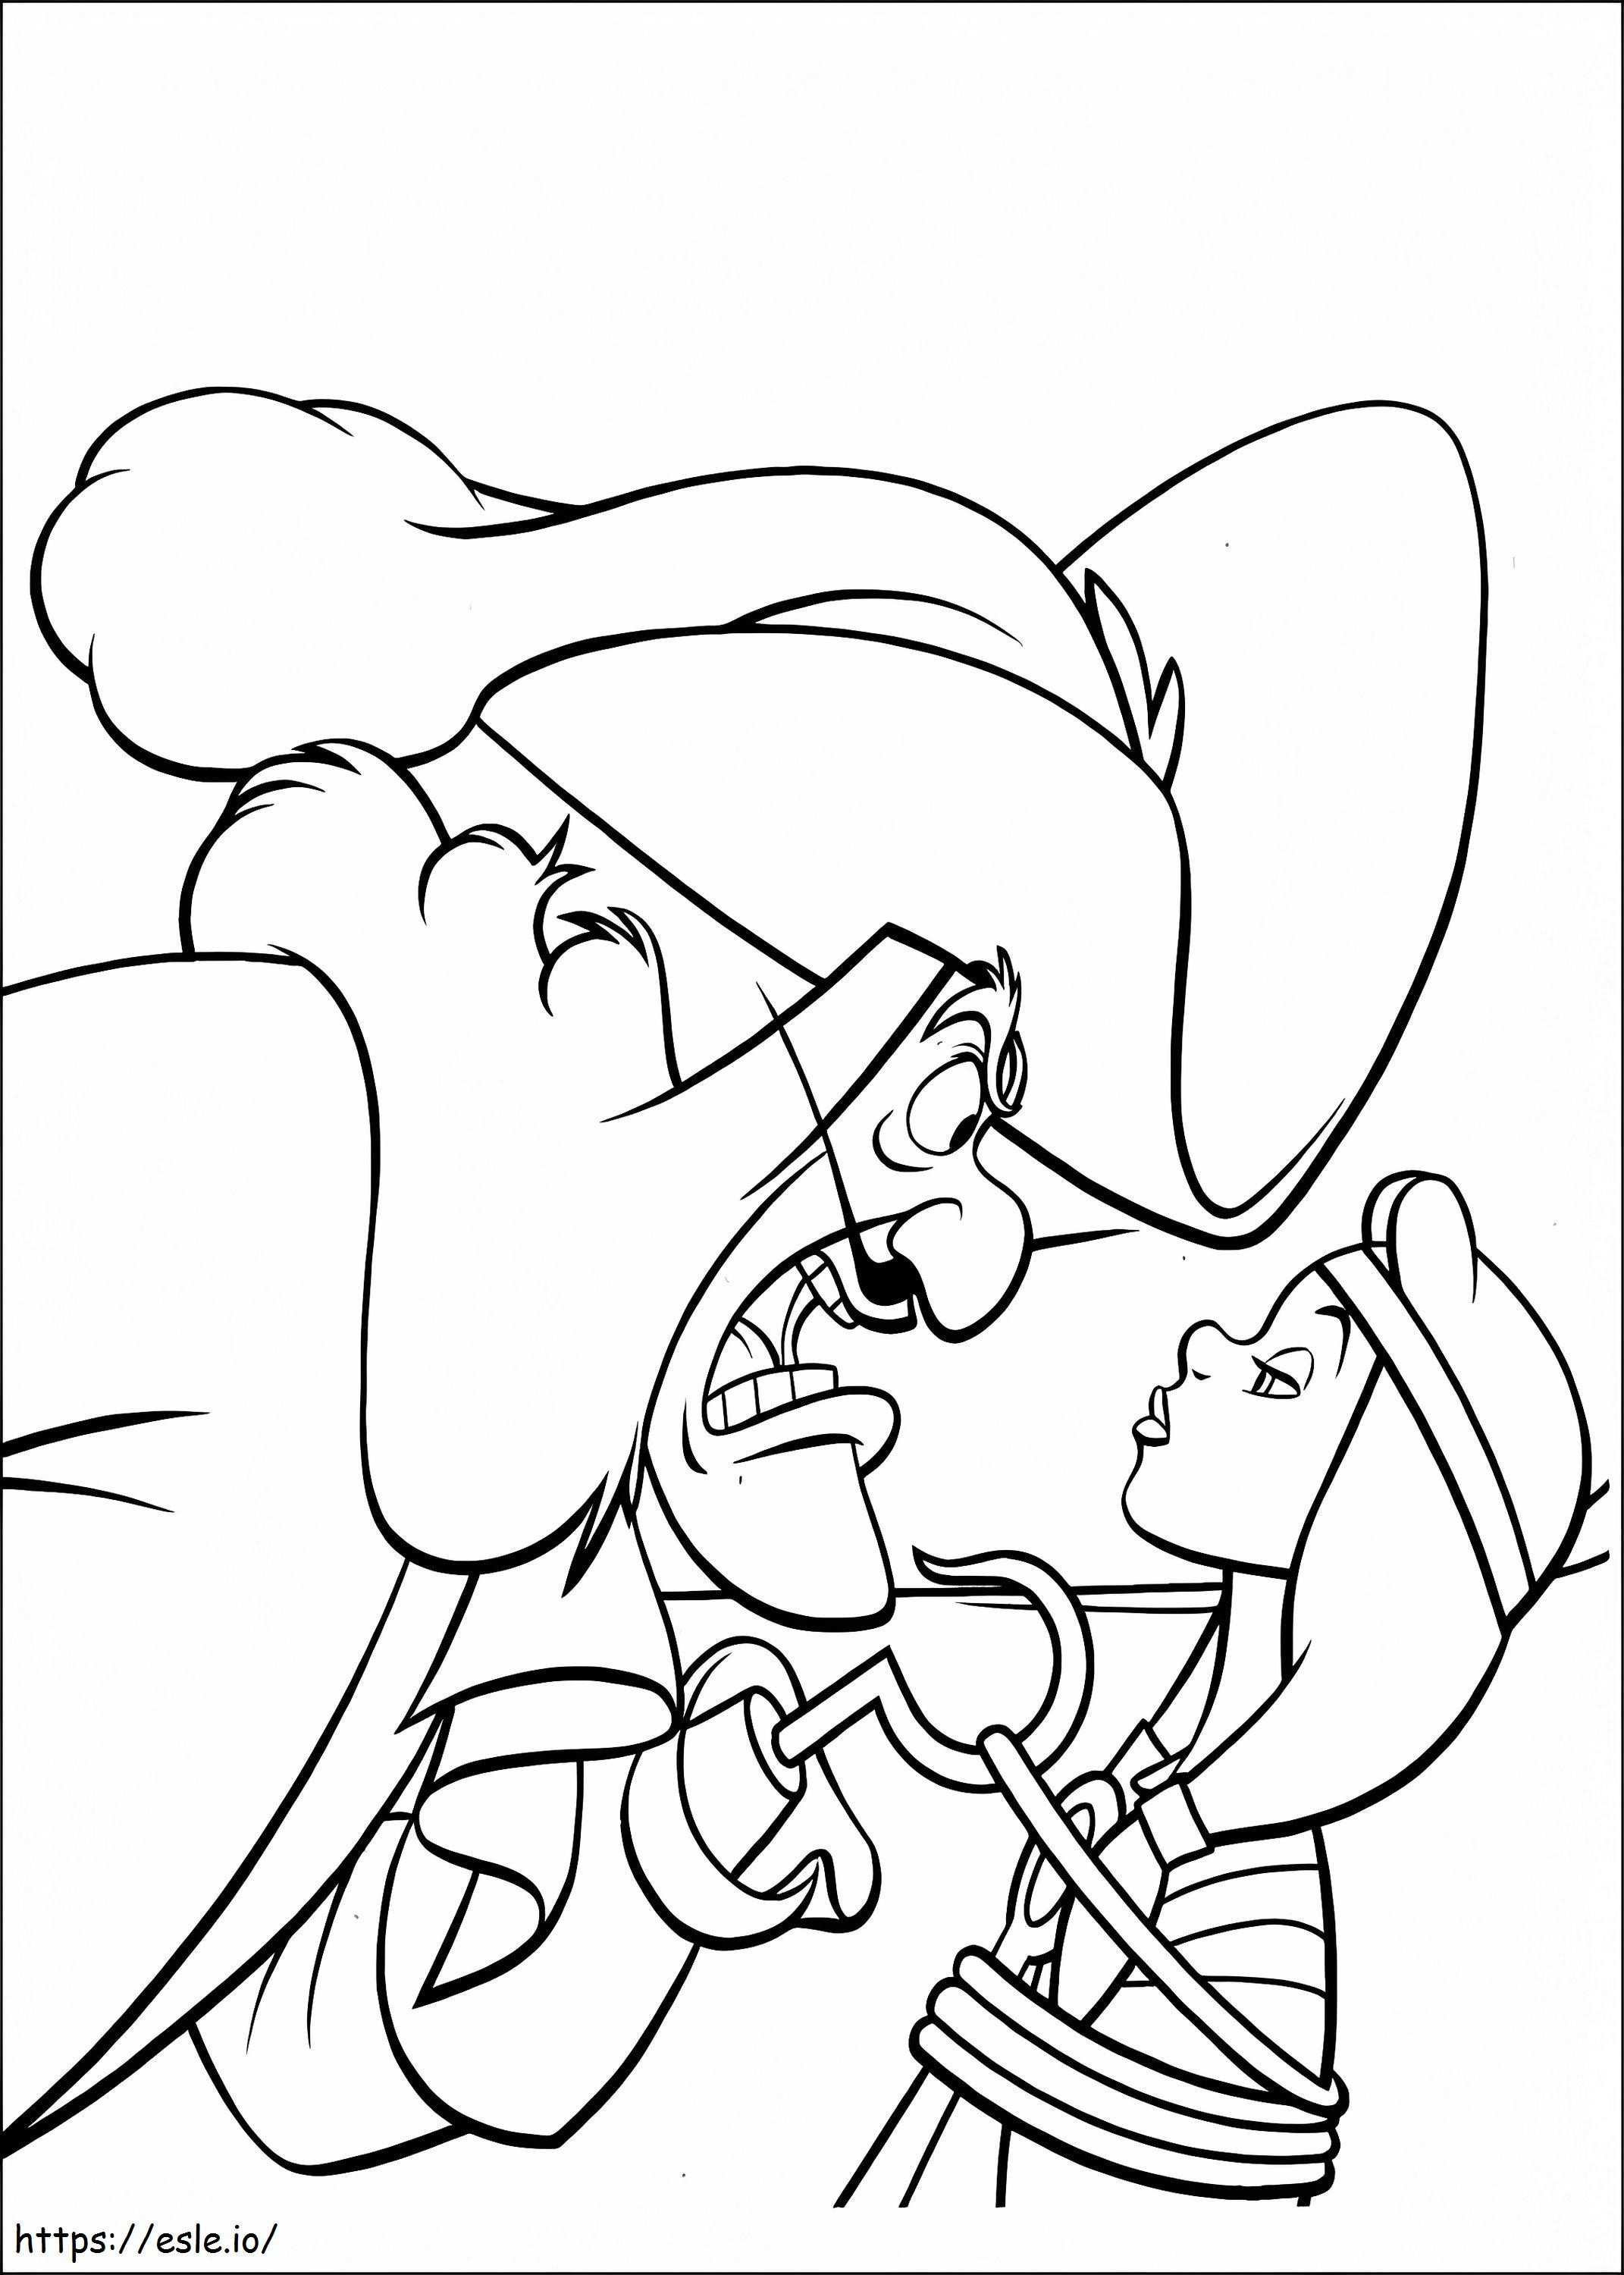 Captain Hook And Wendy coloring page